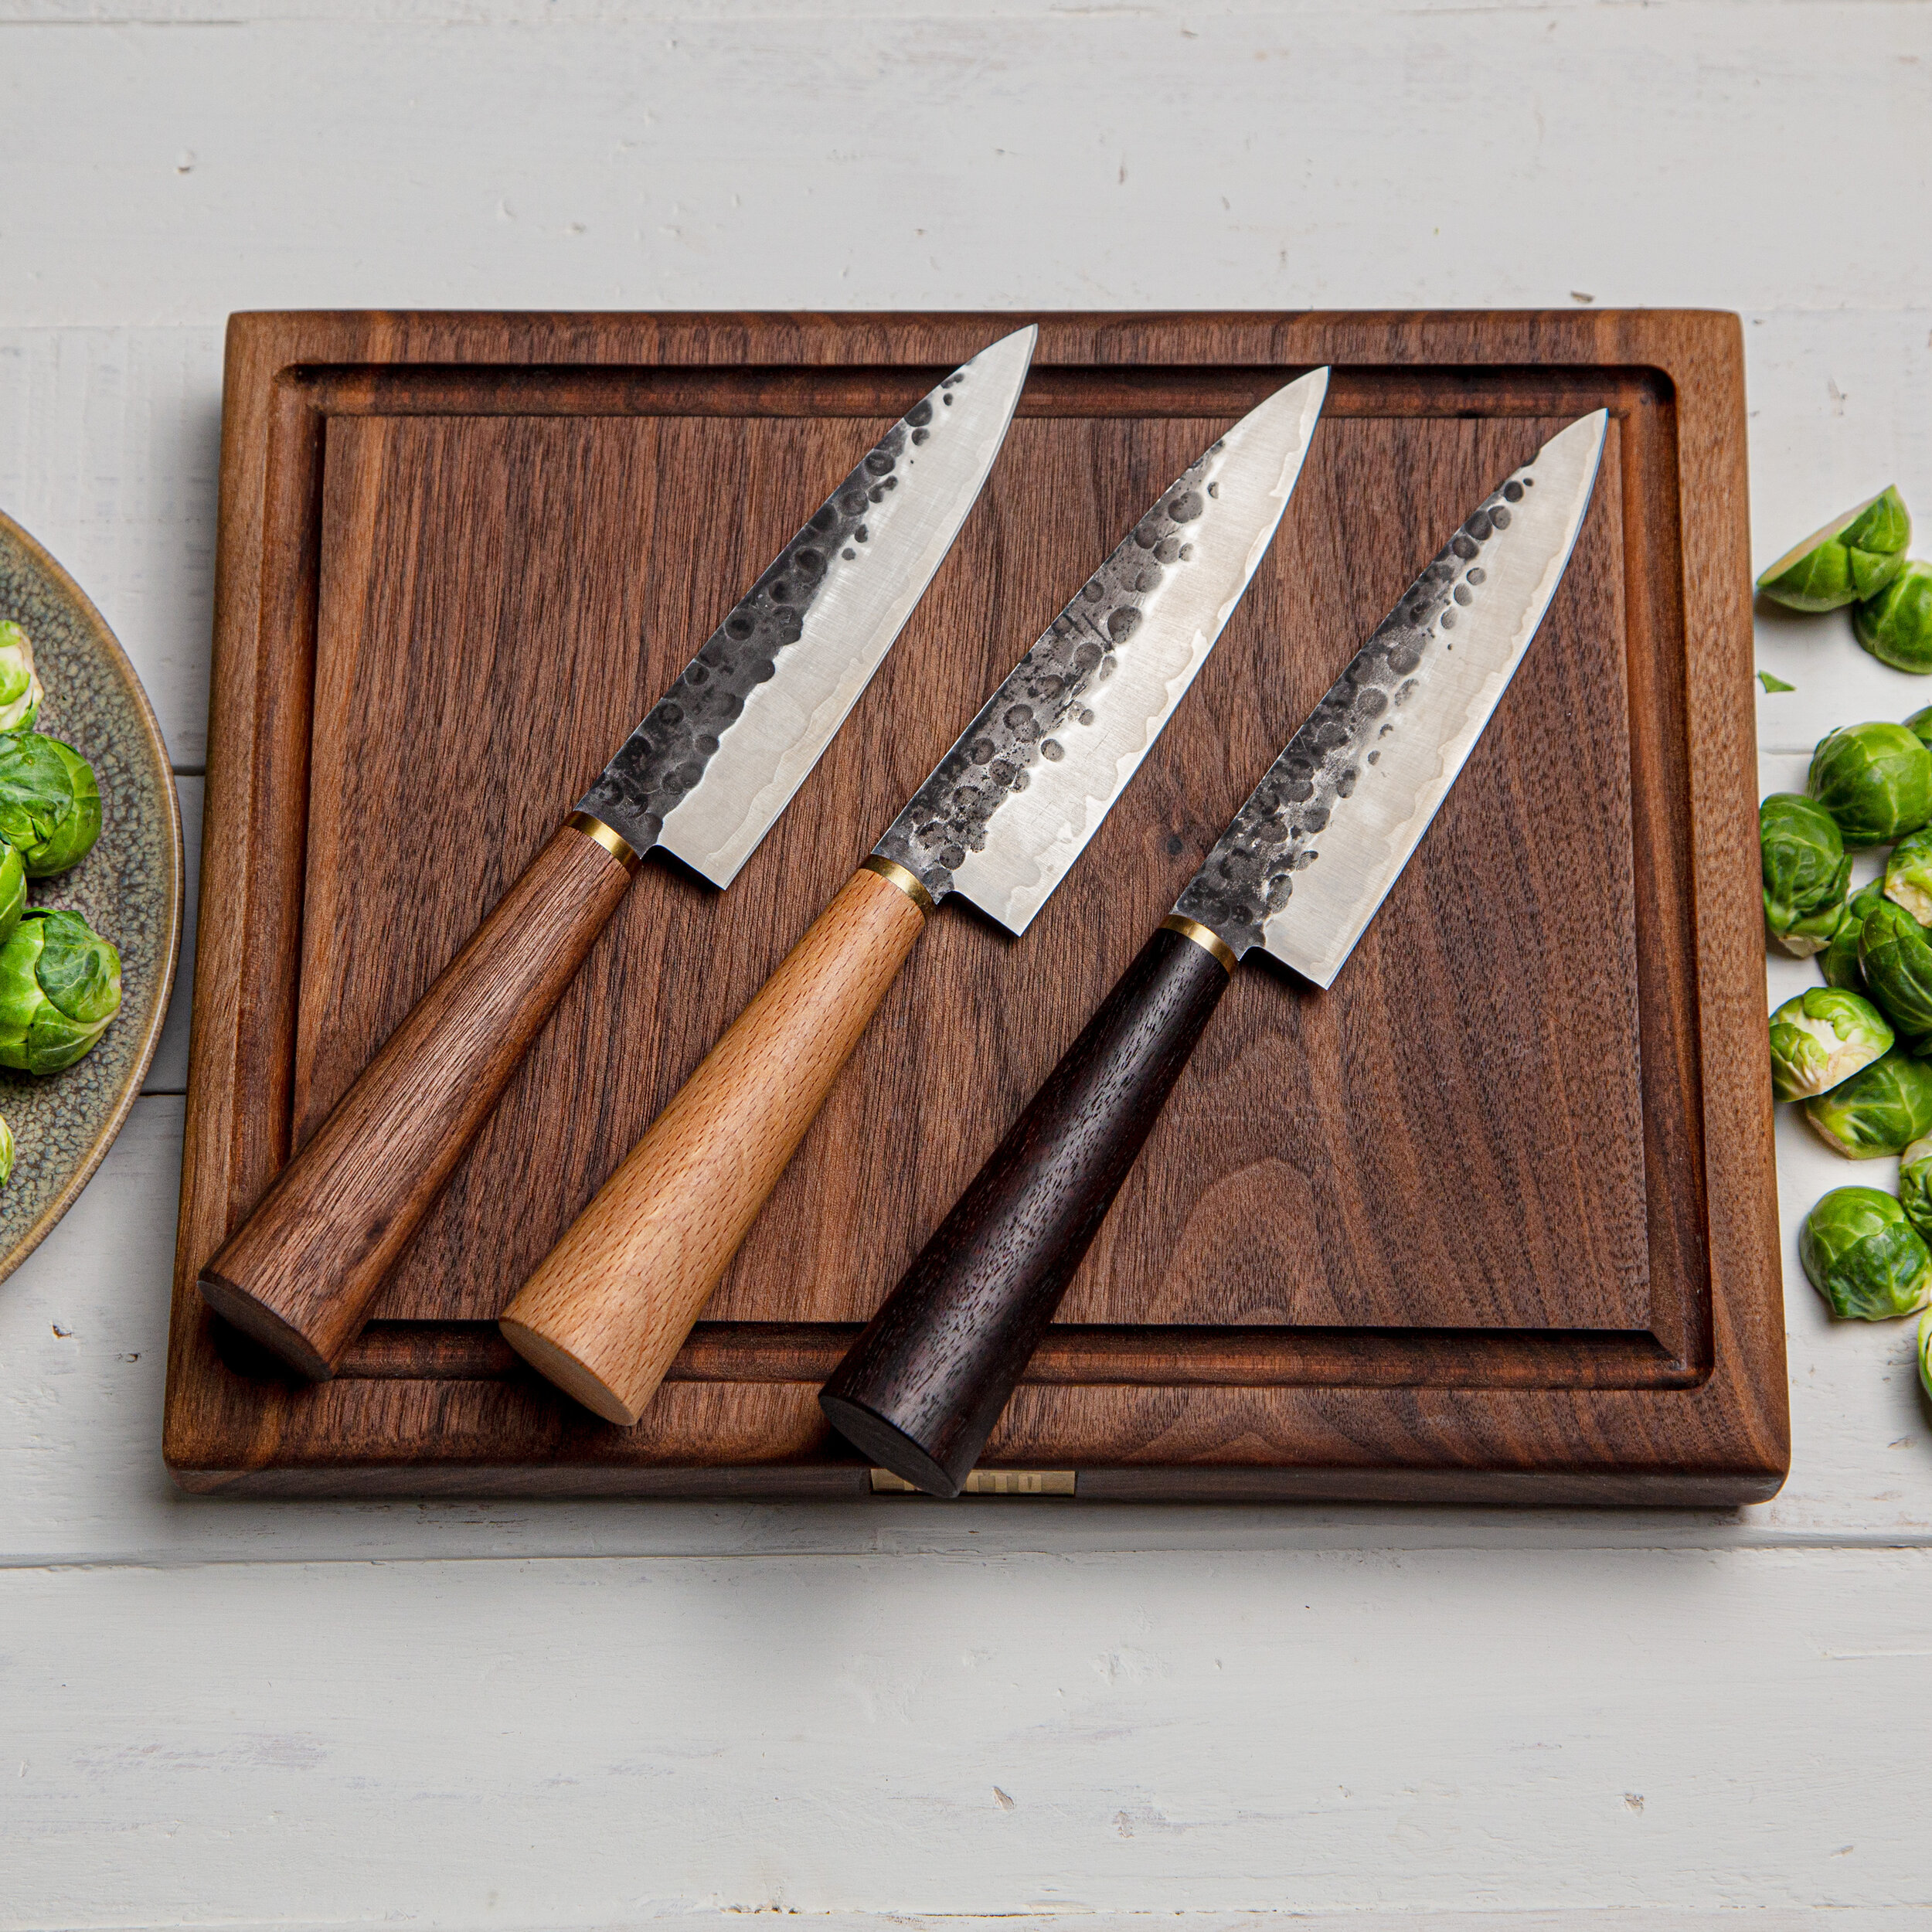 katto-knives-utility-set-sprouts.jpg